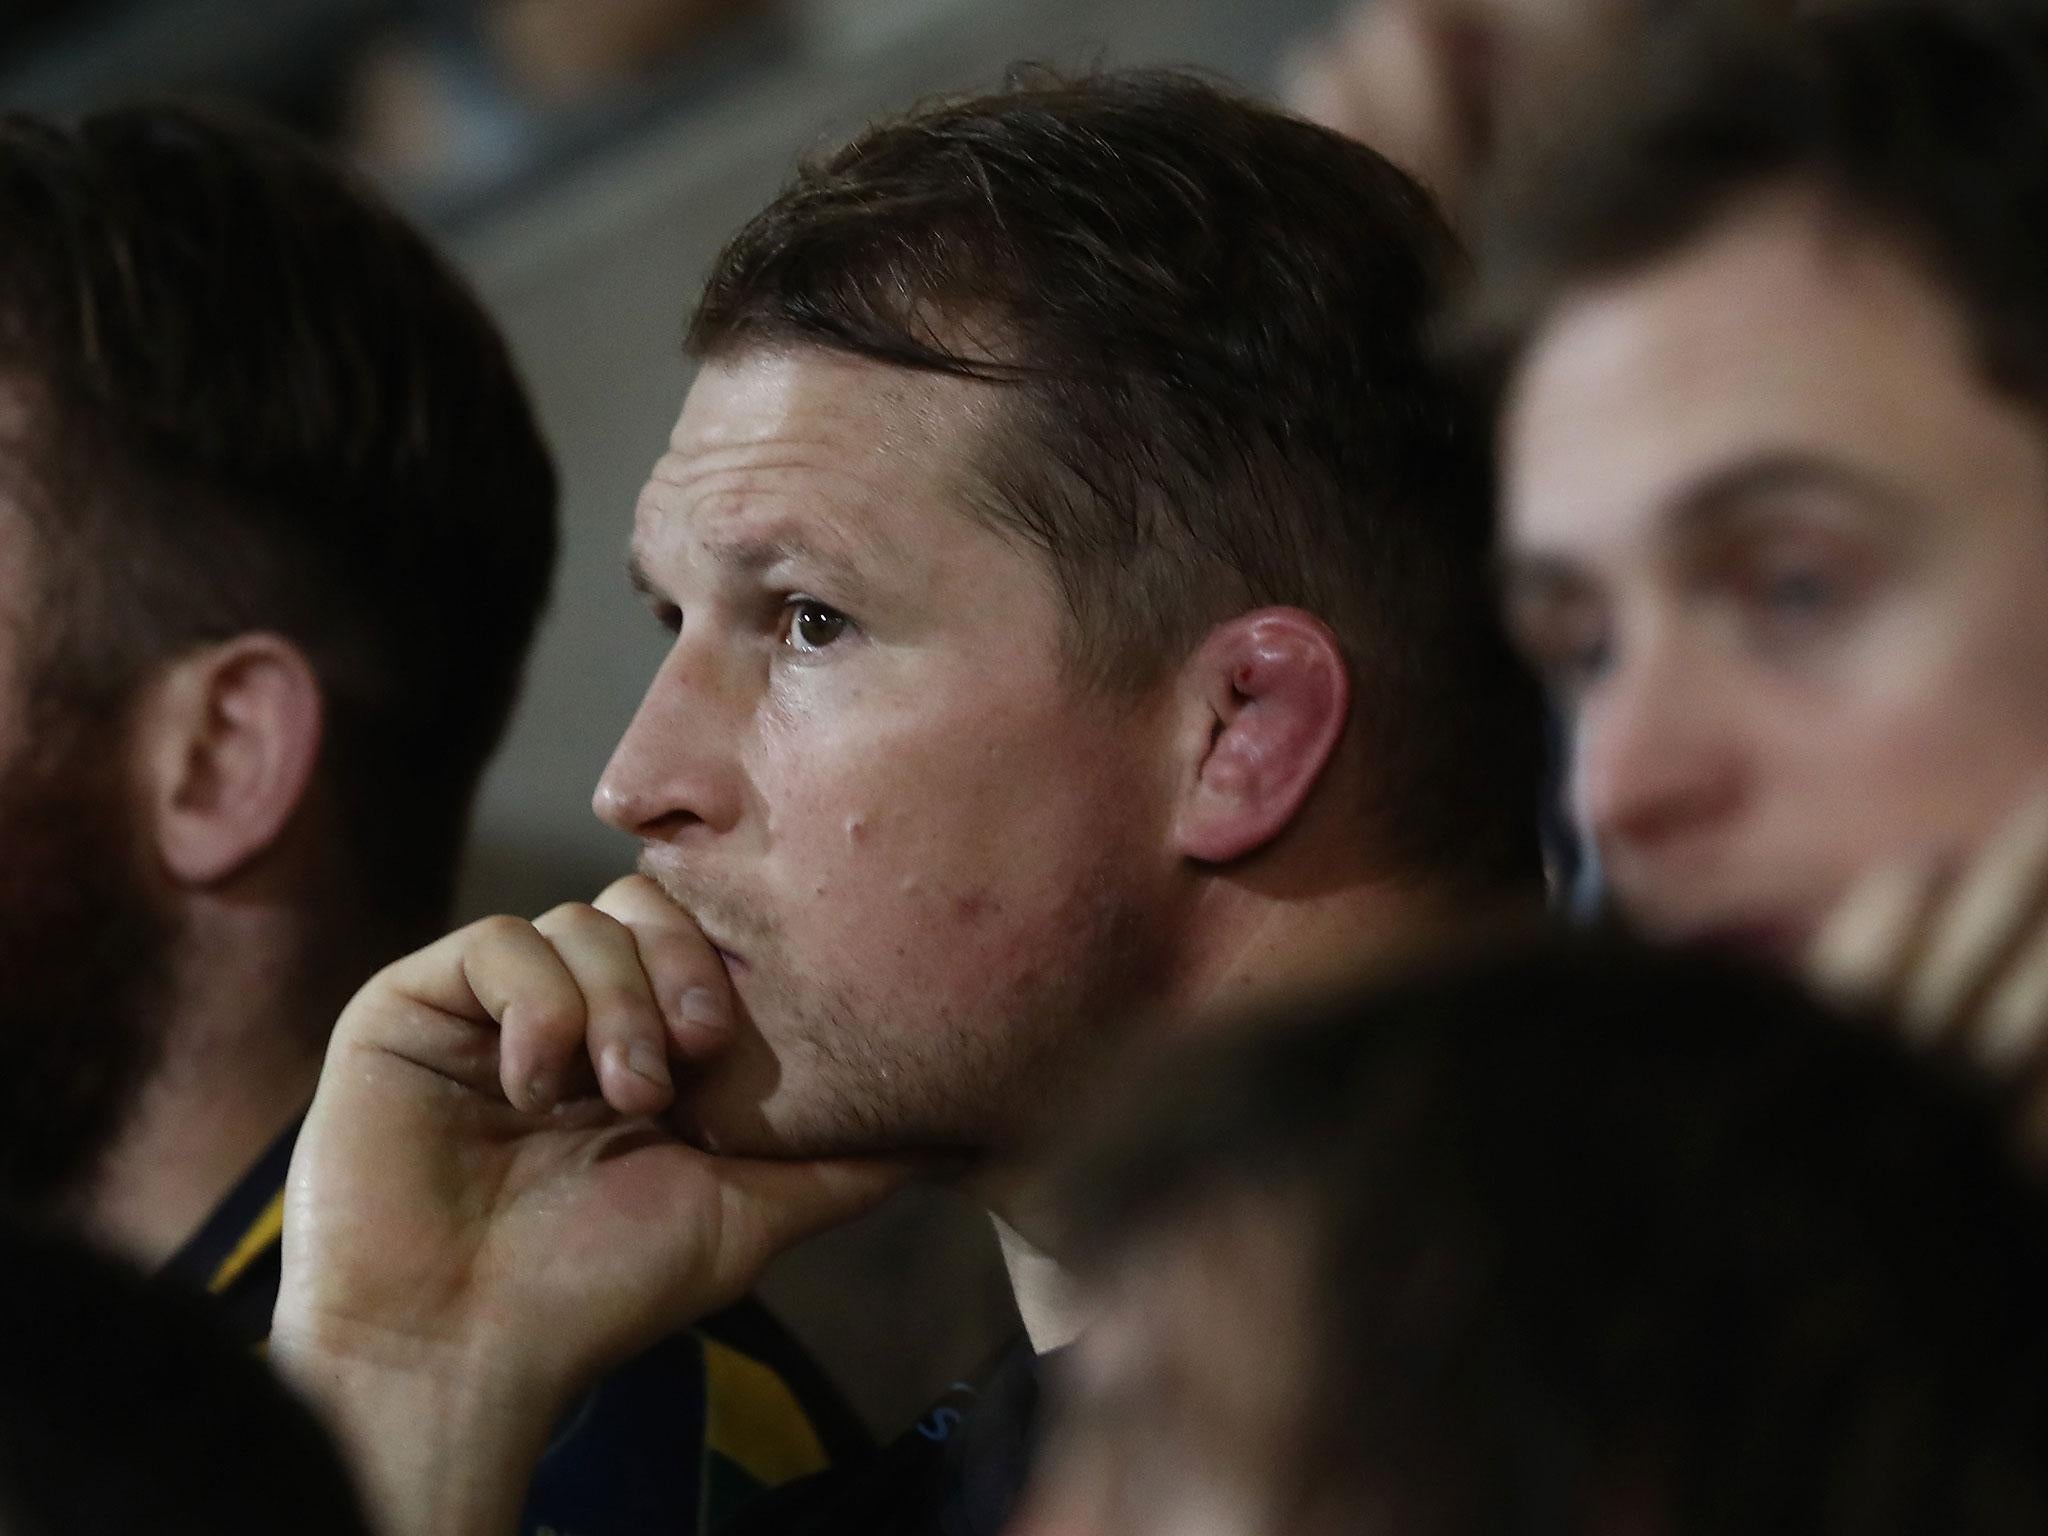 Dylan Hartley has now been suspended for a total of 60 weeks throughout his professional career